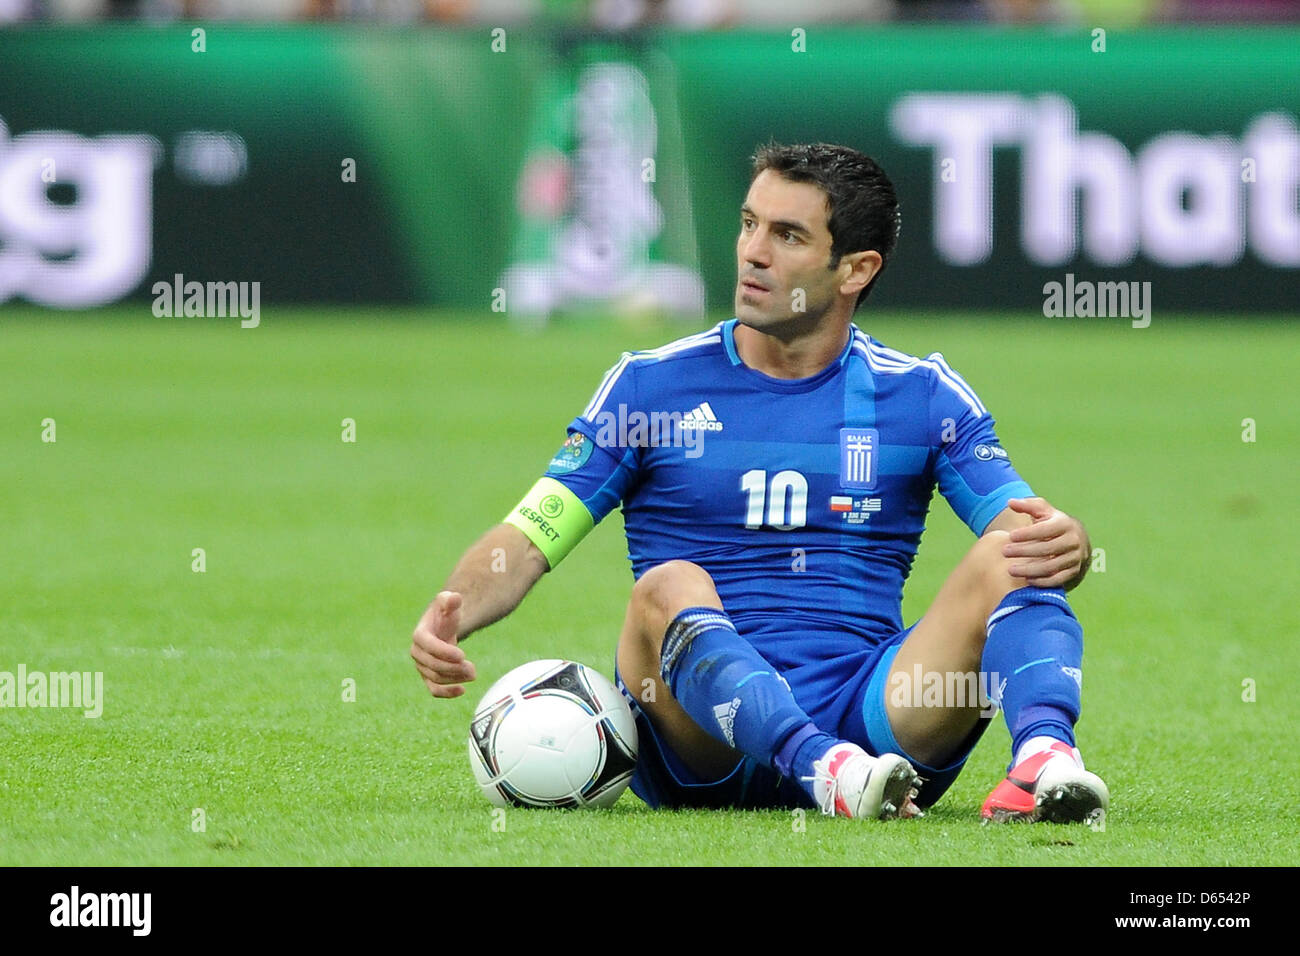 Greece's Giorgos Karagounis sits on the pitch during the UEFA Euro 2012 match between Poland and Greece at the national stadium in Warsaw, Poland, 08 June 2012. Photo: Pressfocus / Revierfoto Stock Photo